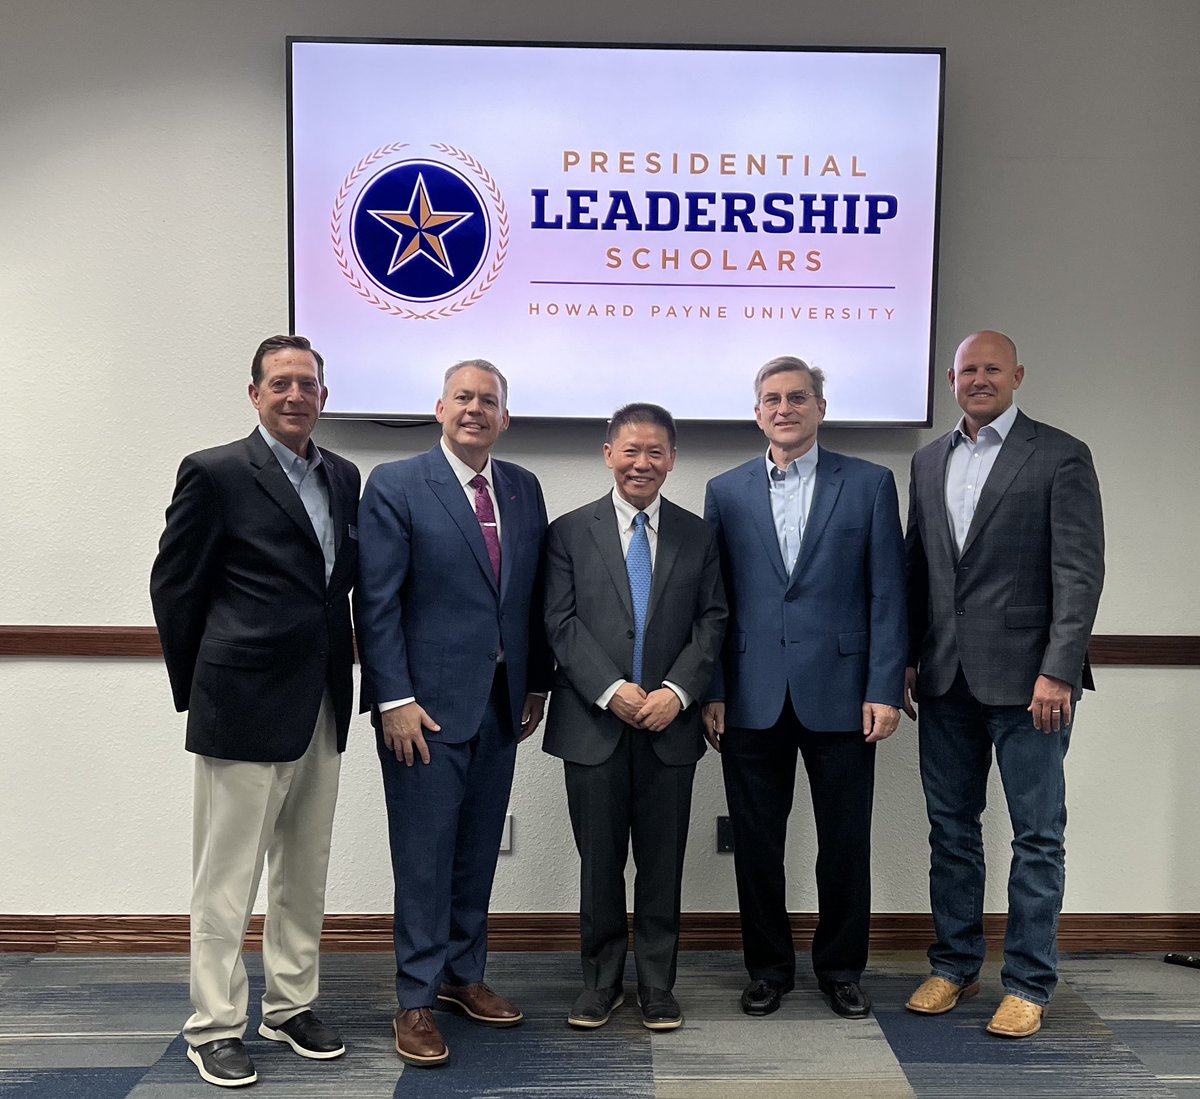 It was a honor hosting Dr. Bob Fu of China Aid on campus yesterday. He did an amazing job preaching in chapel and challenging our students who attended the Presidential Leadership Scholars lunch. @BobFu4China @HPUTX